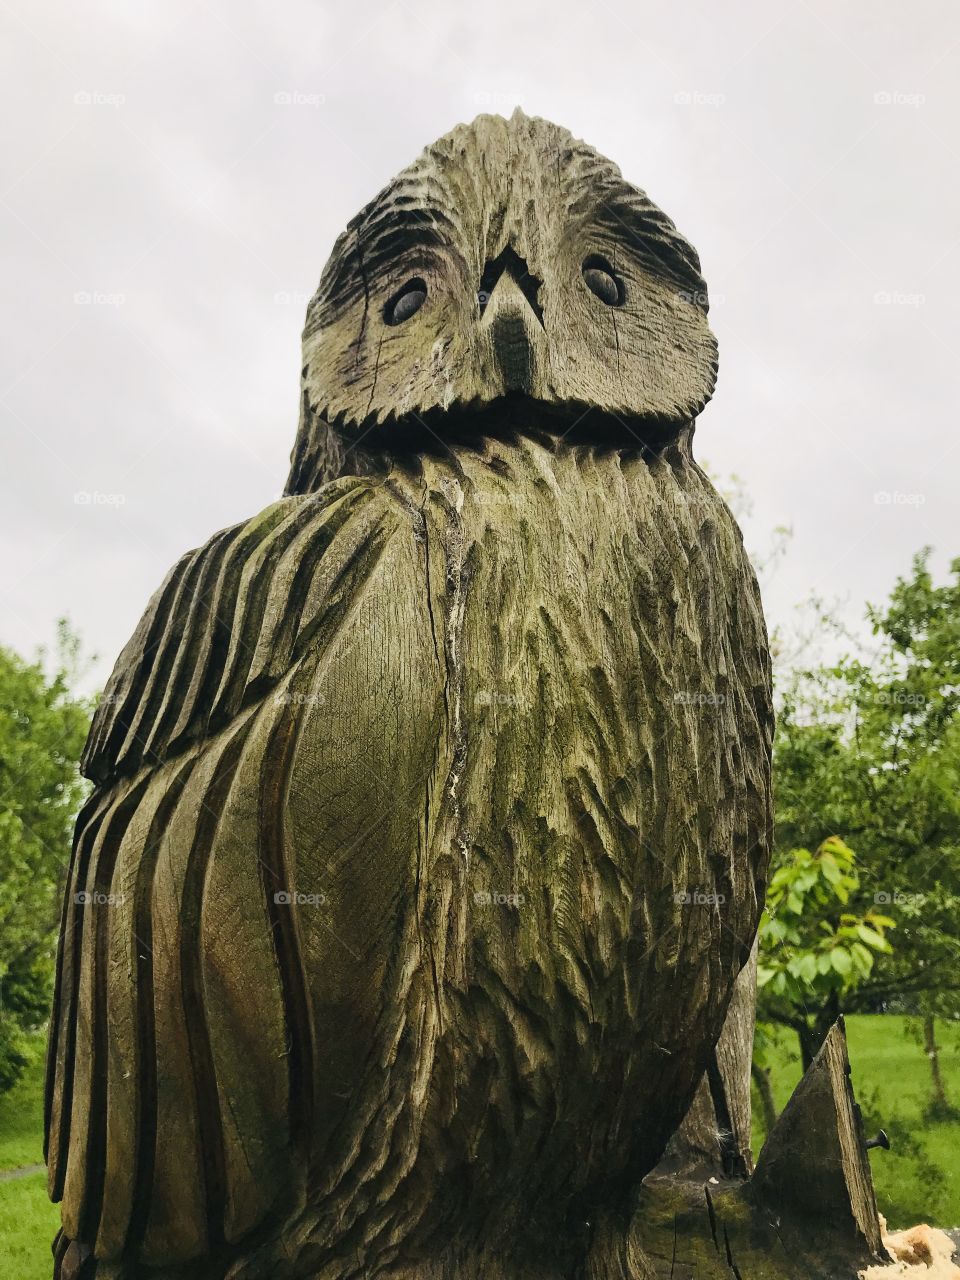 A wooden owl sculpture in an orchard